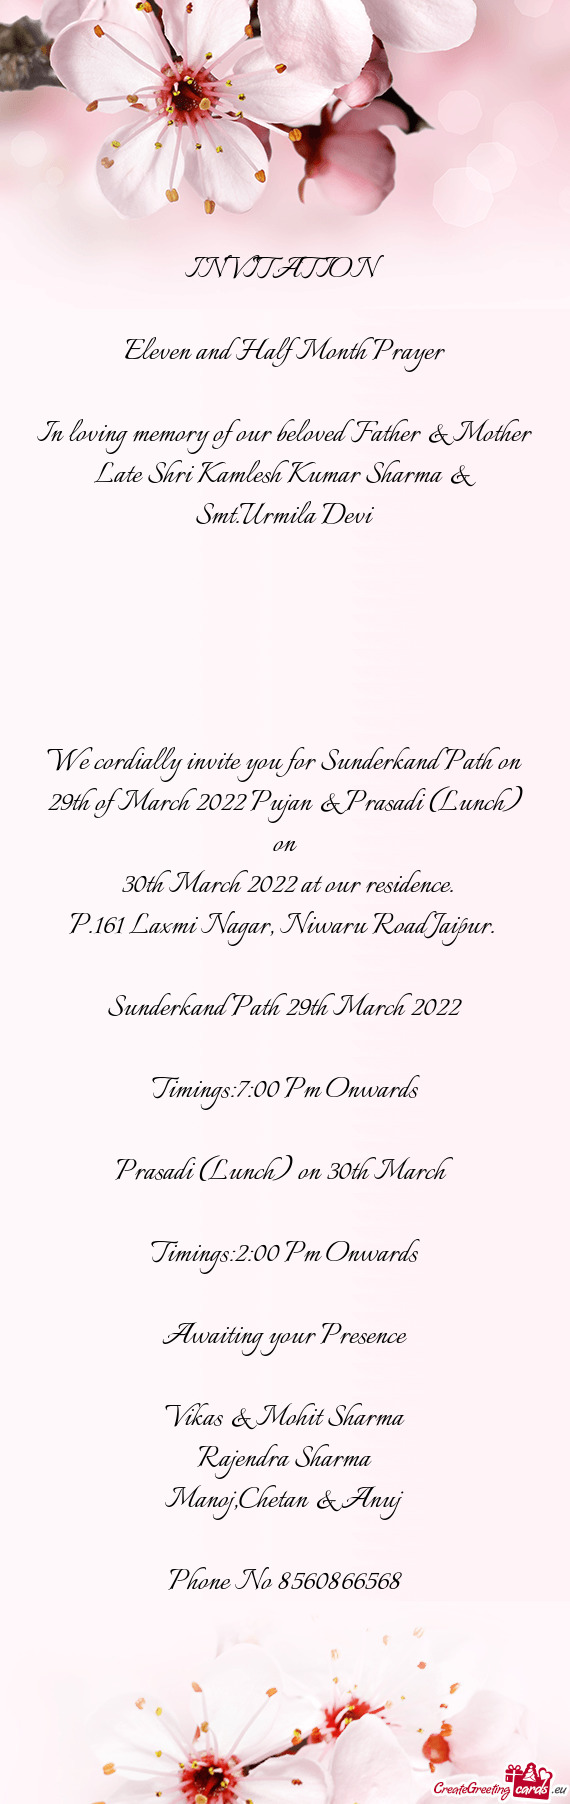 We cordially invite you for Sunderkand Path on 29th of March 2022 Pujan & Prasadi (Lunch) on